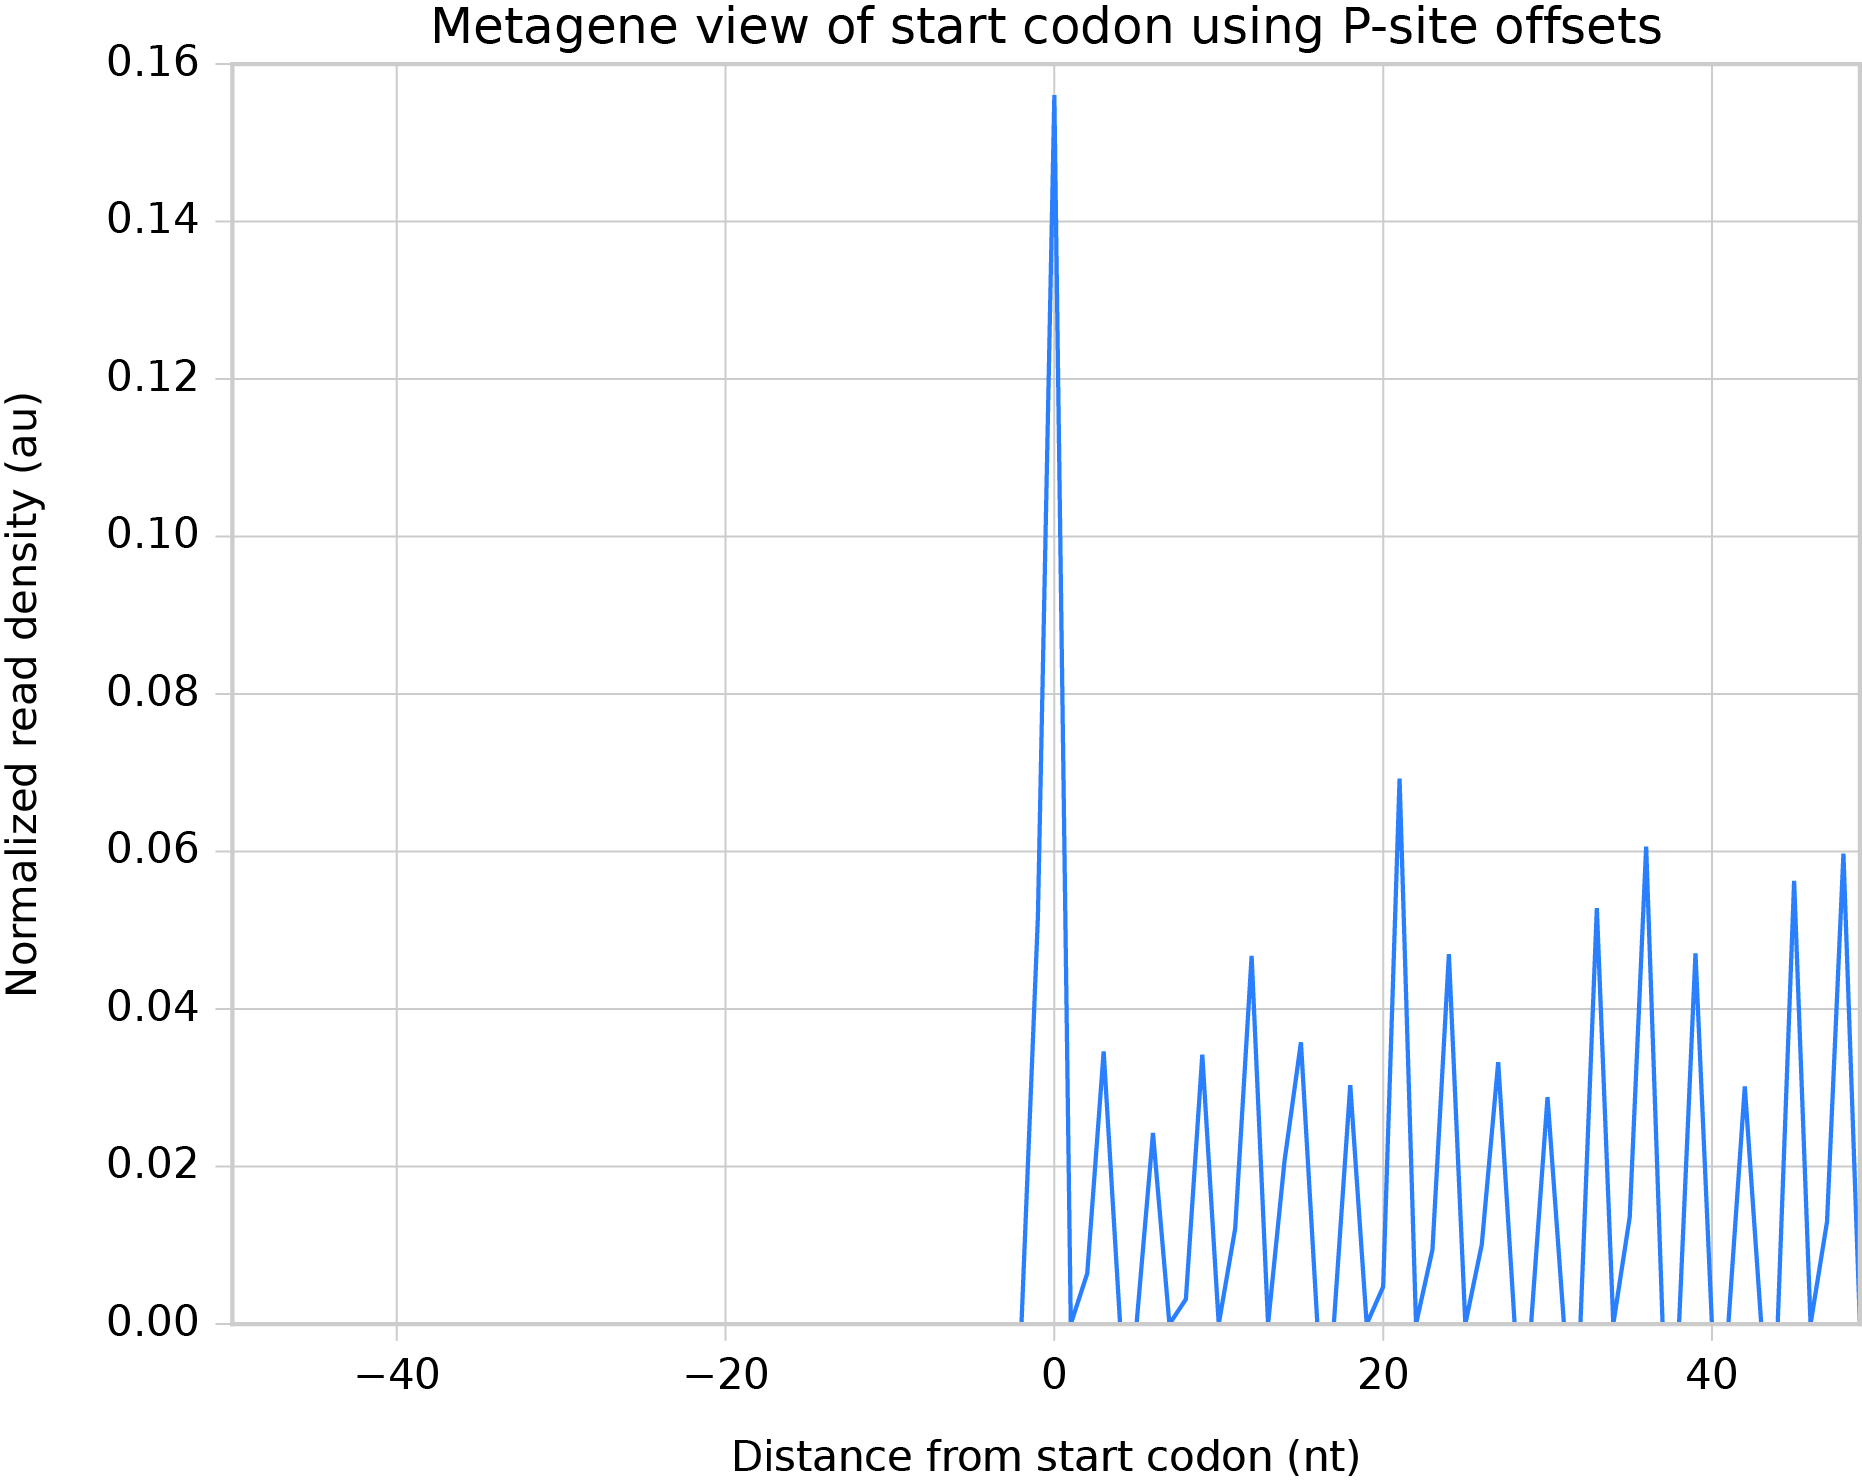 Metagene around start codin with P-site offsets applied